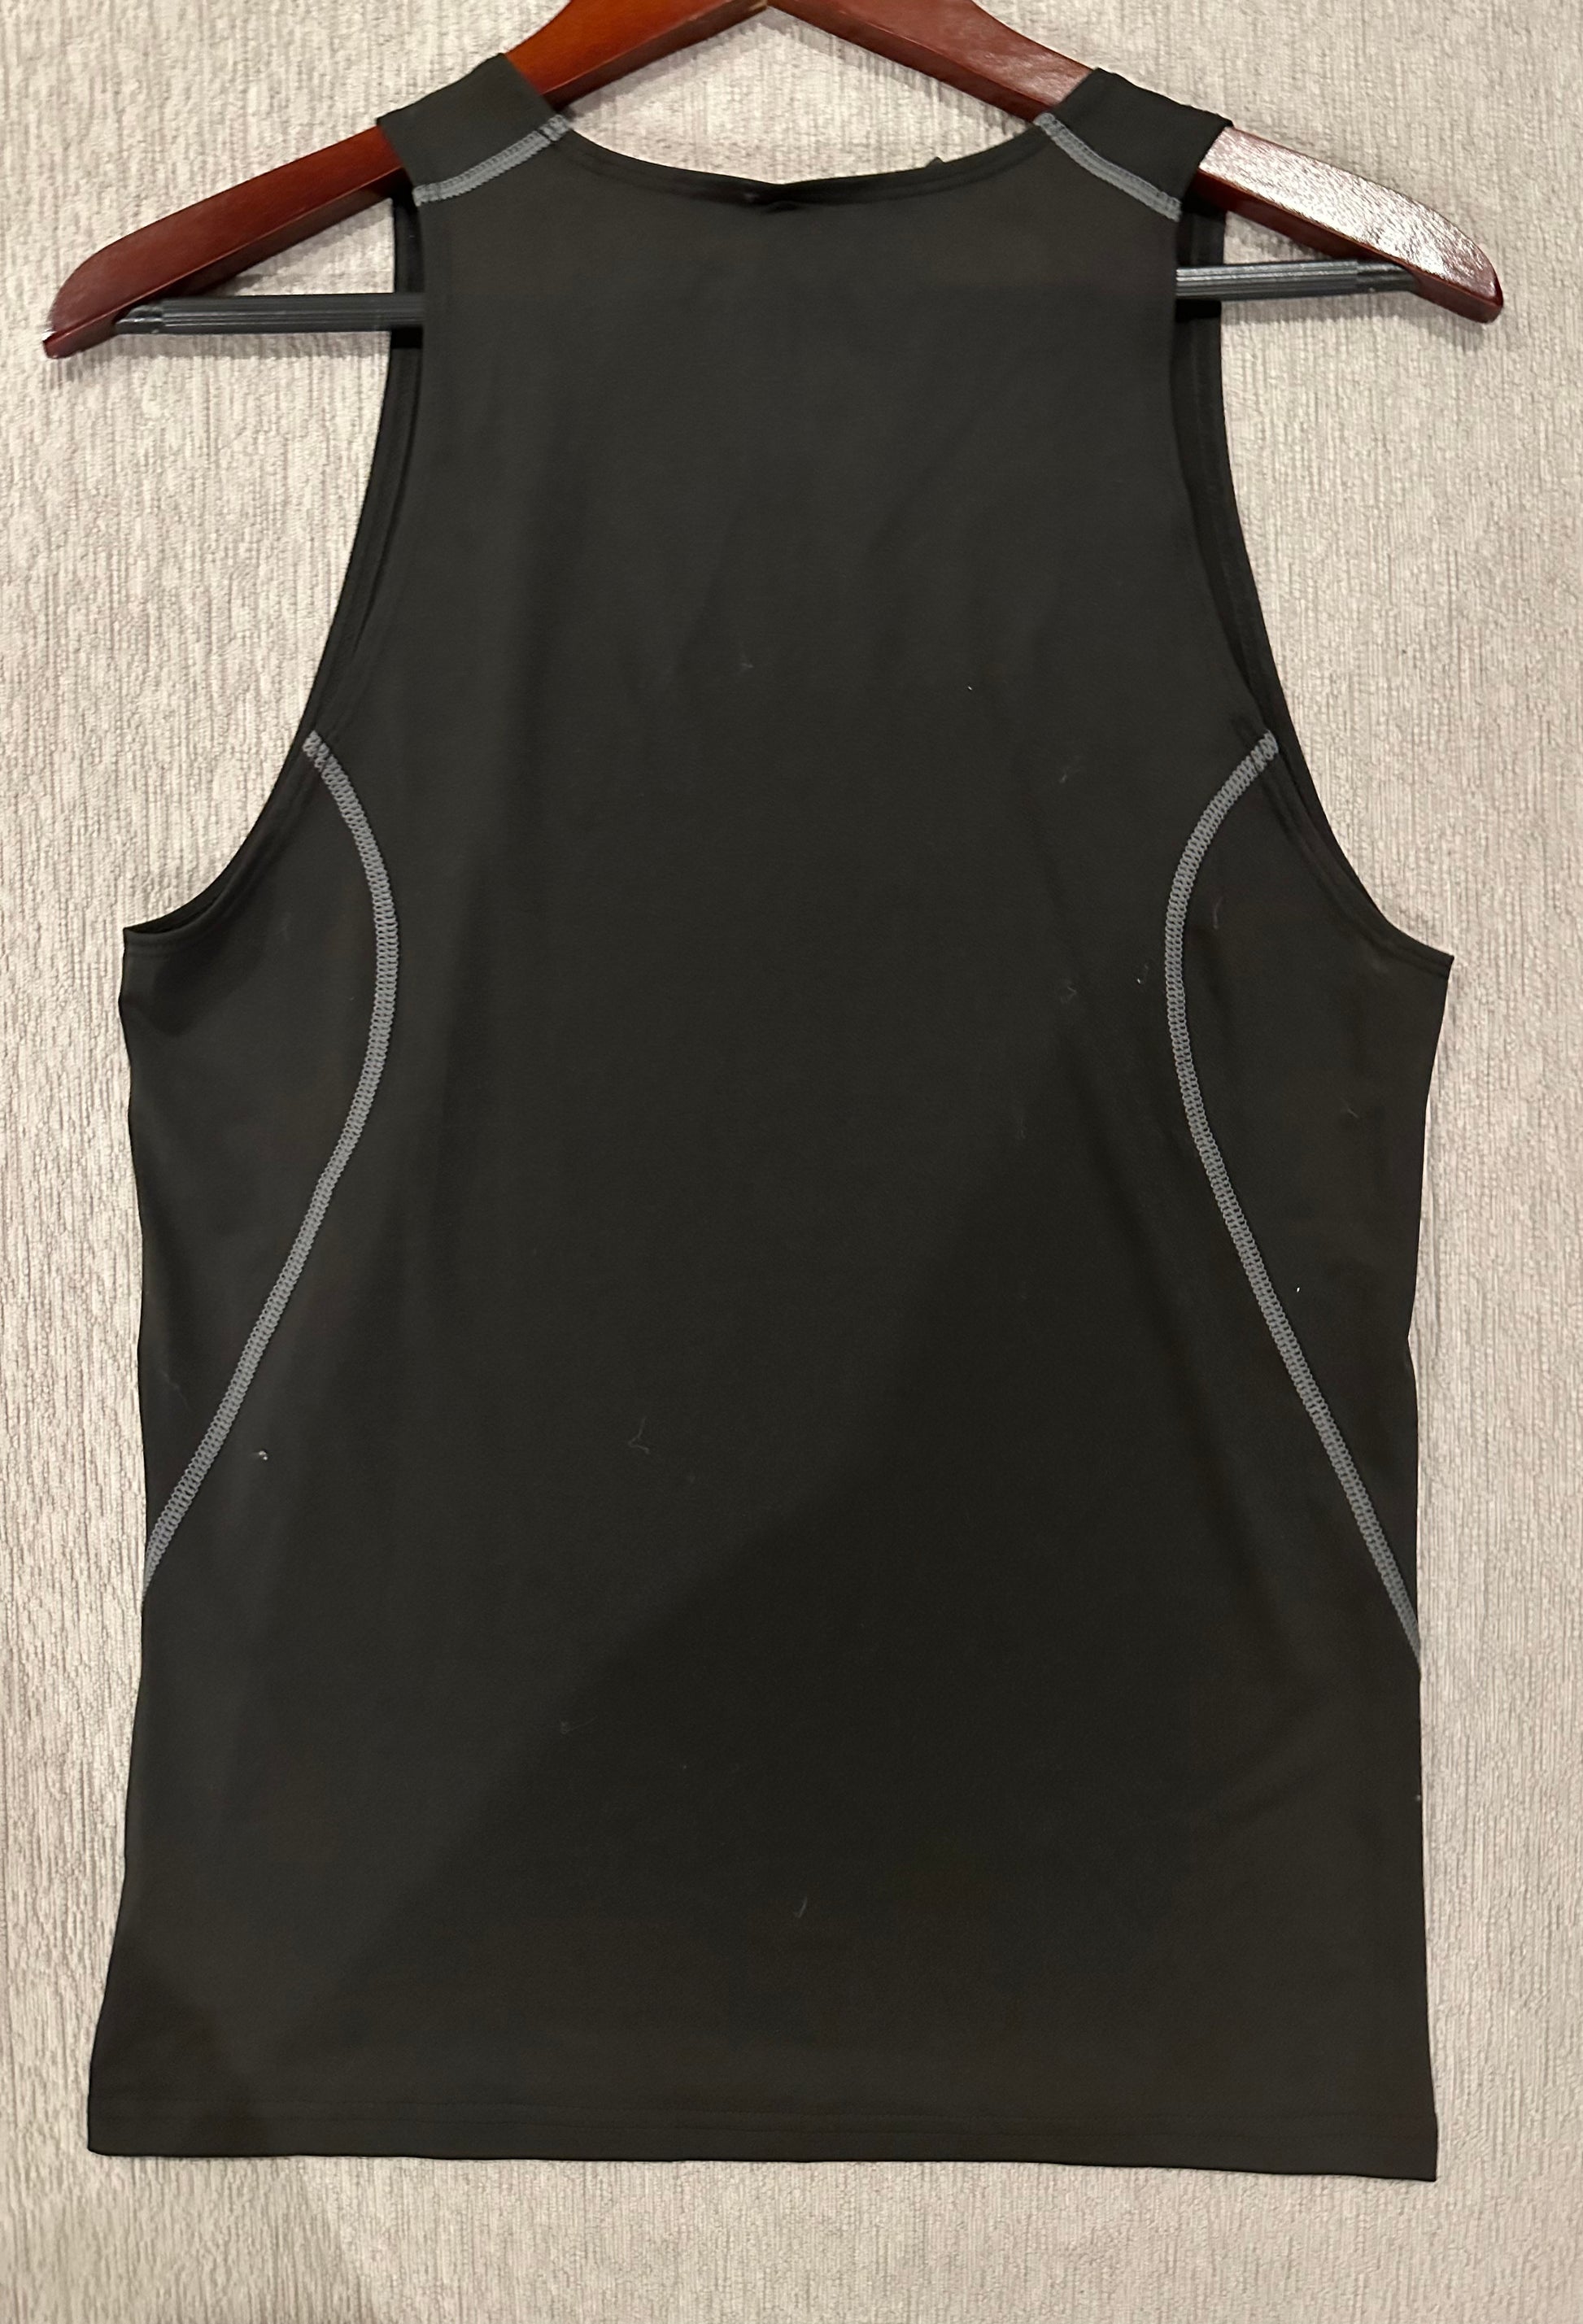 Where to Get Nba Compression Tank Tops